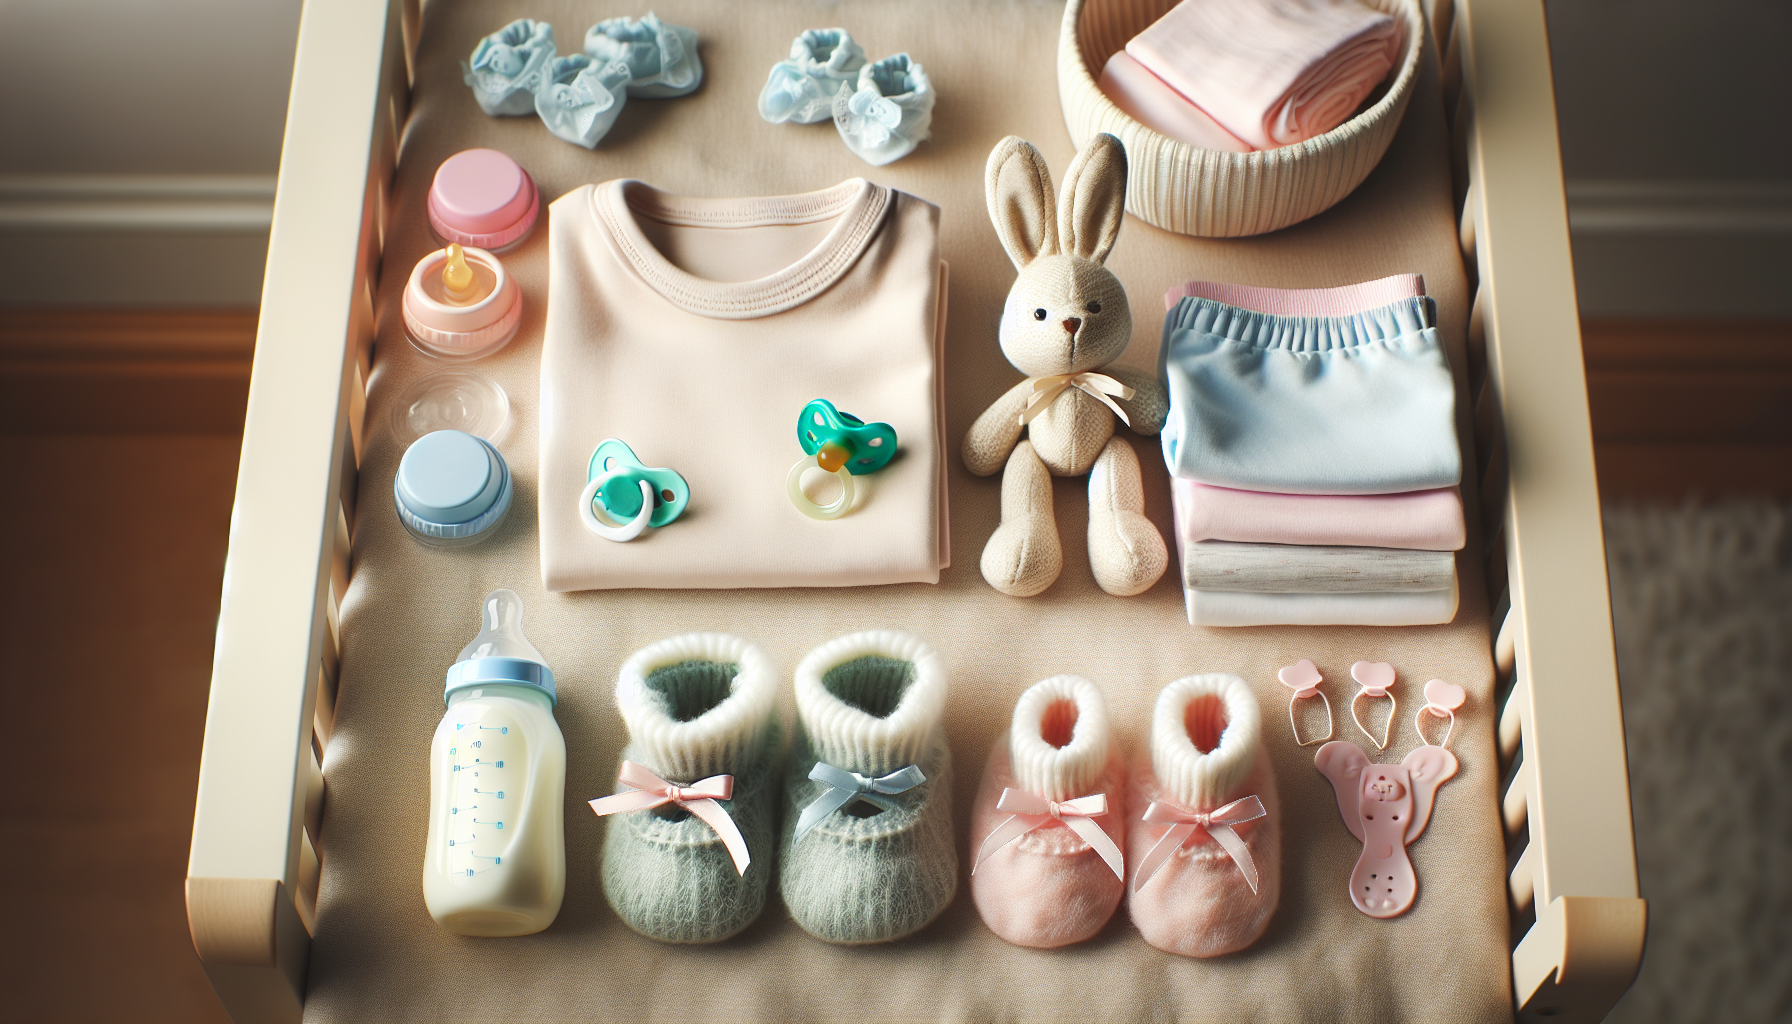 Ordering made Easy: A Guide for New Born Items